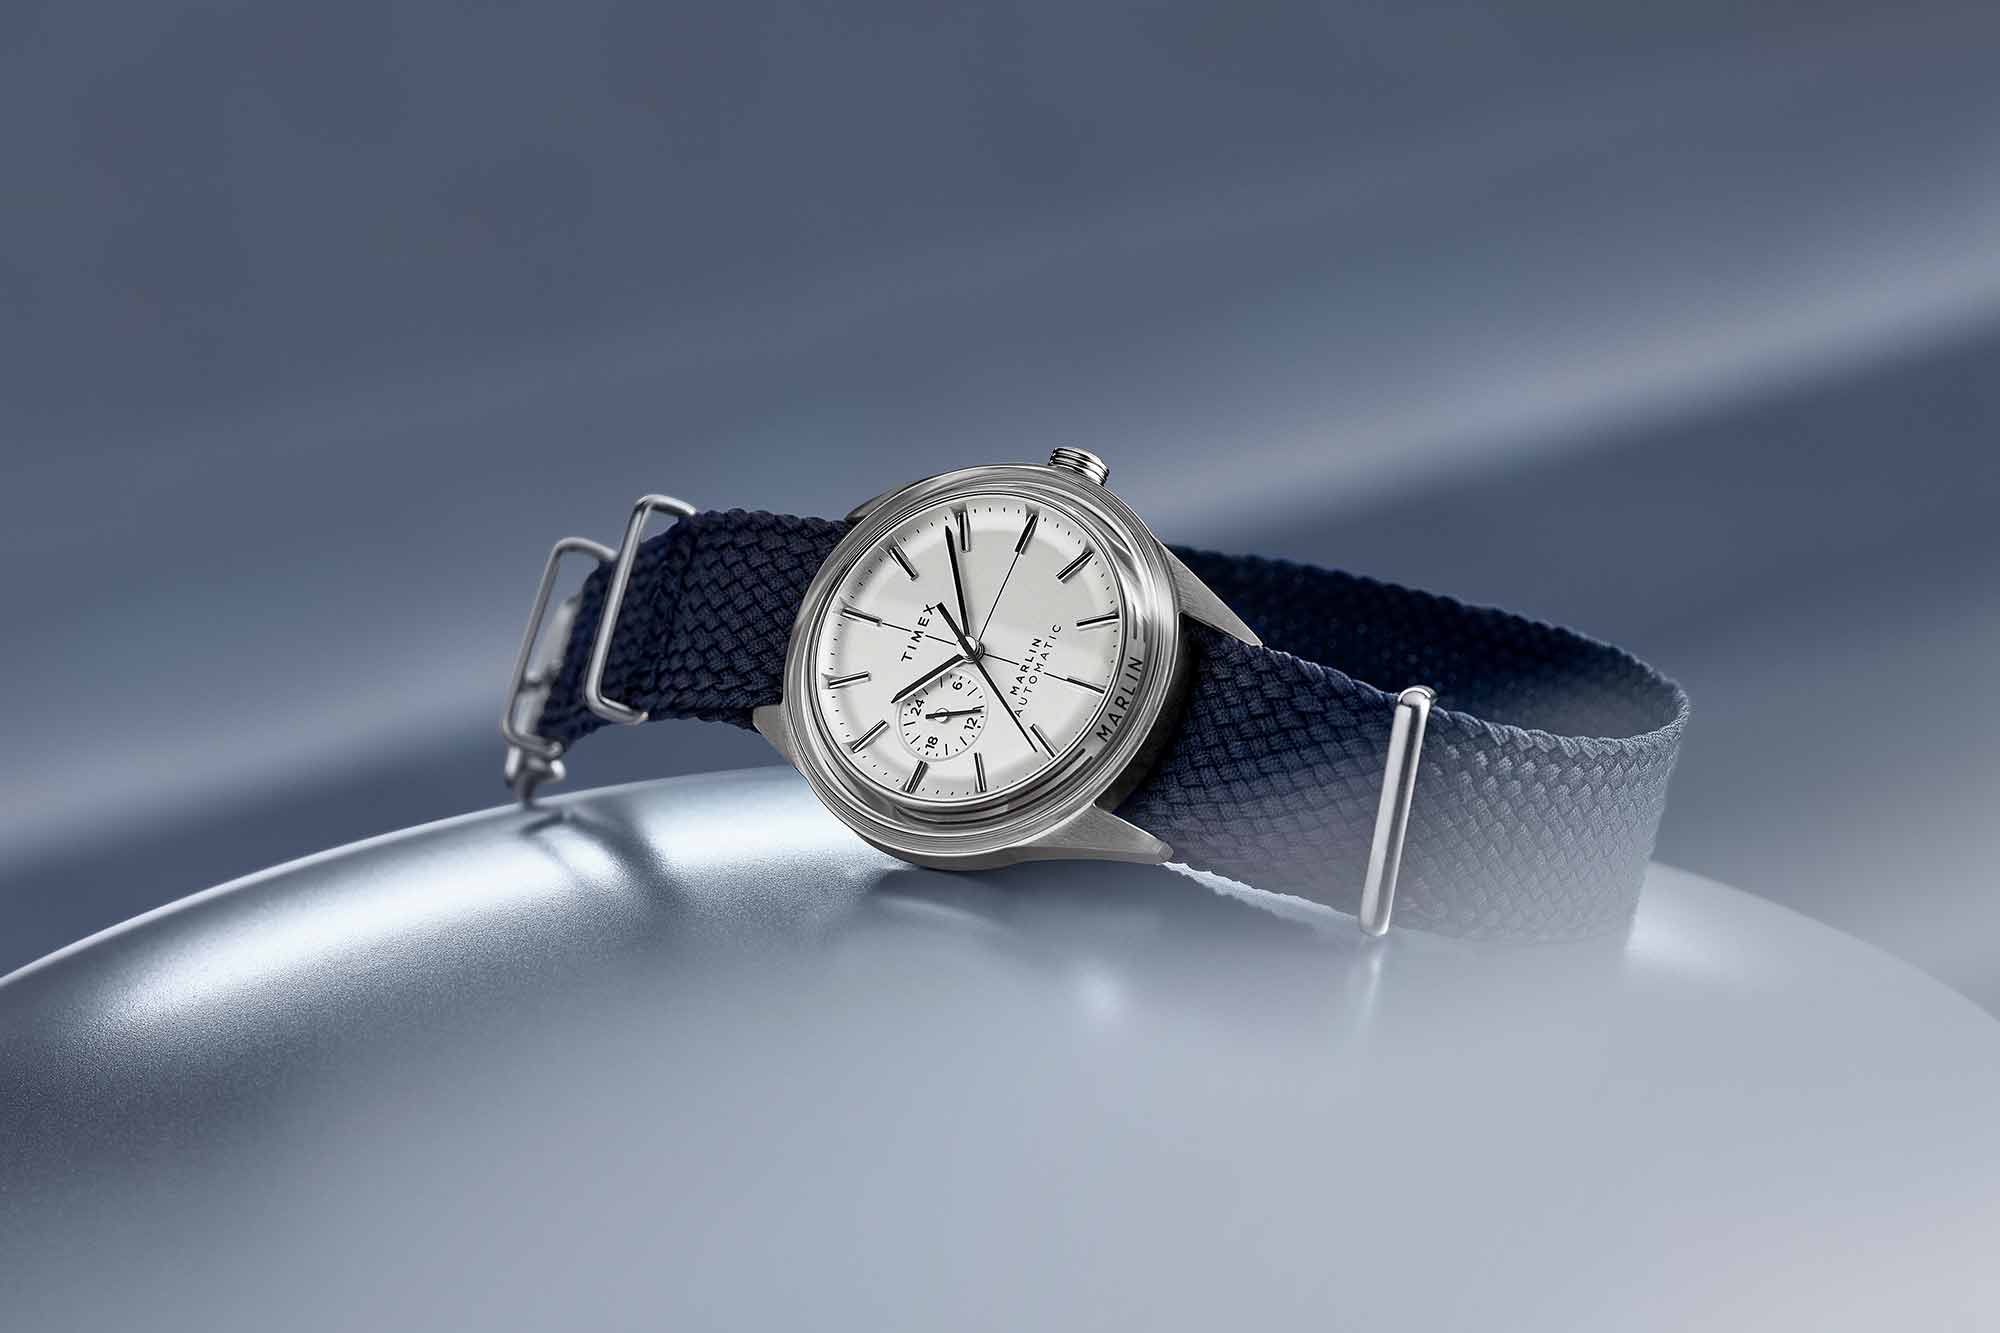 The Marlin Jet is a Sleek New Addition to a Classic Timex Collection ...